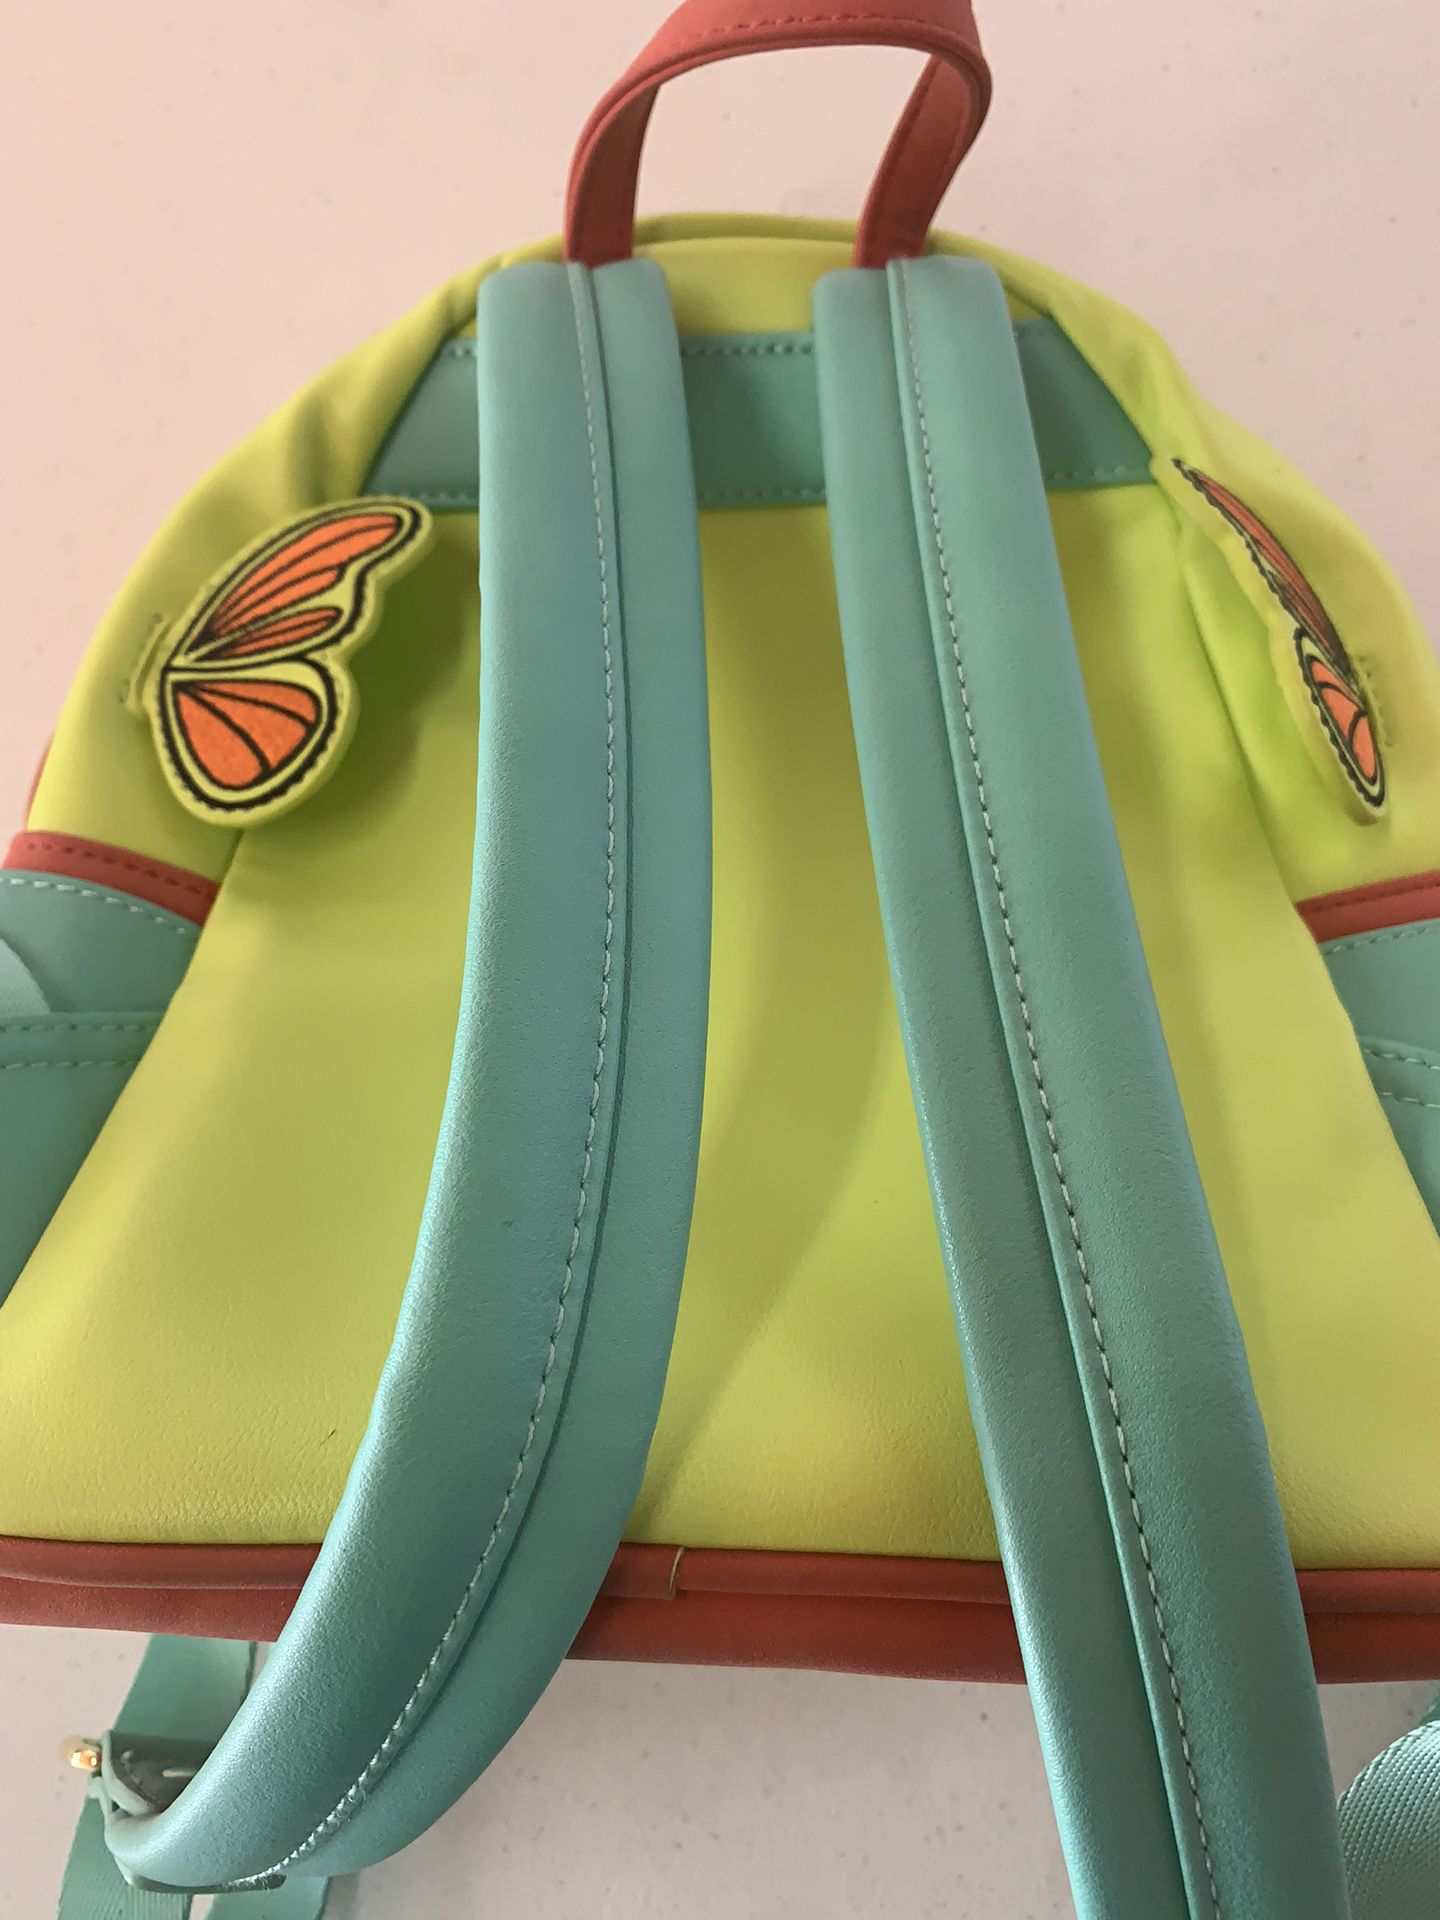 MultiSac Mini Backpack for Sale in Albuquerque, NM - OfferUp